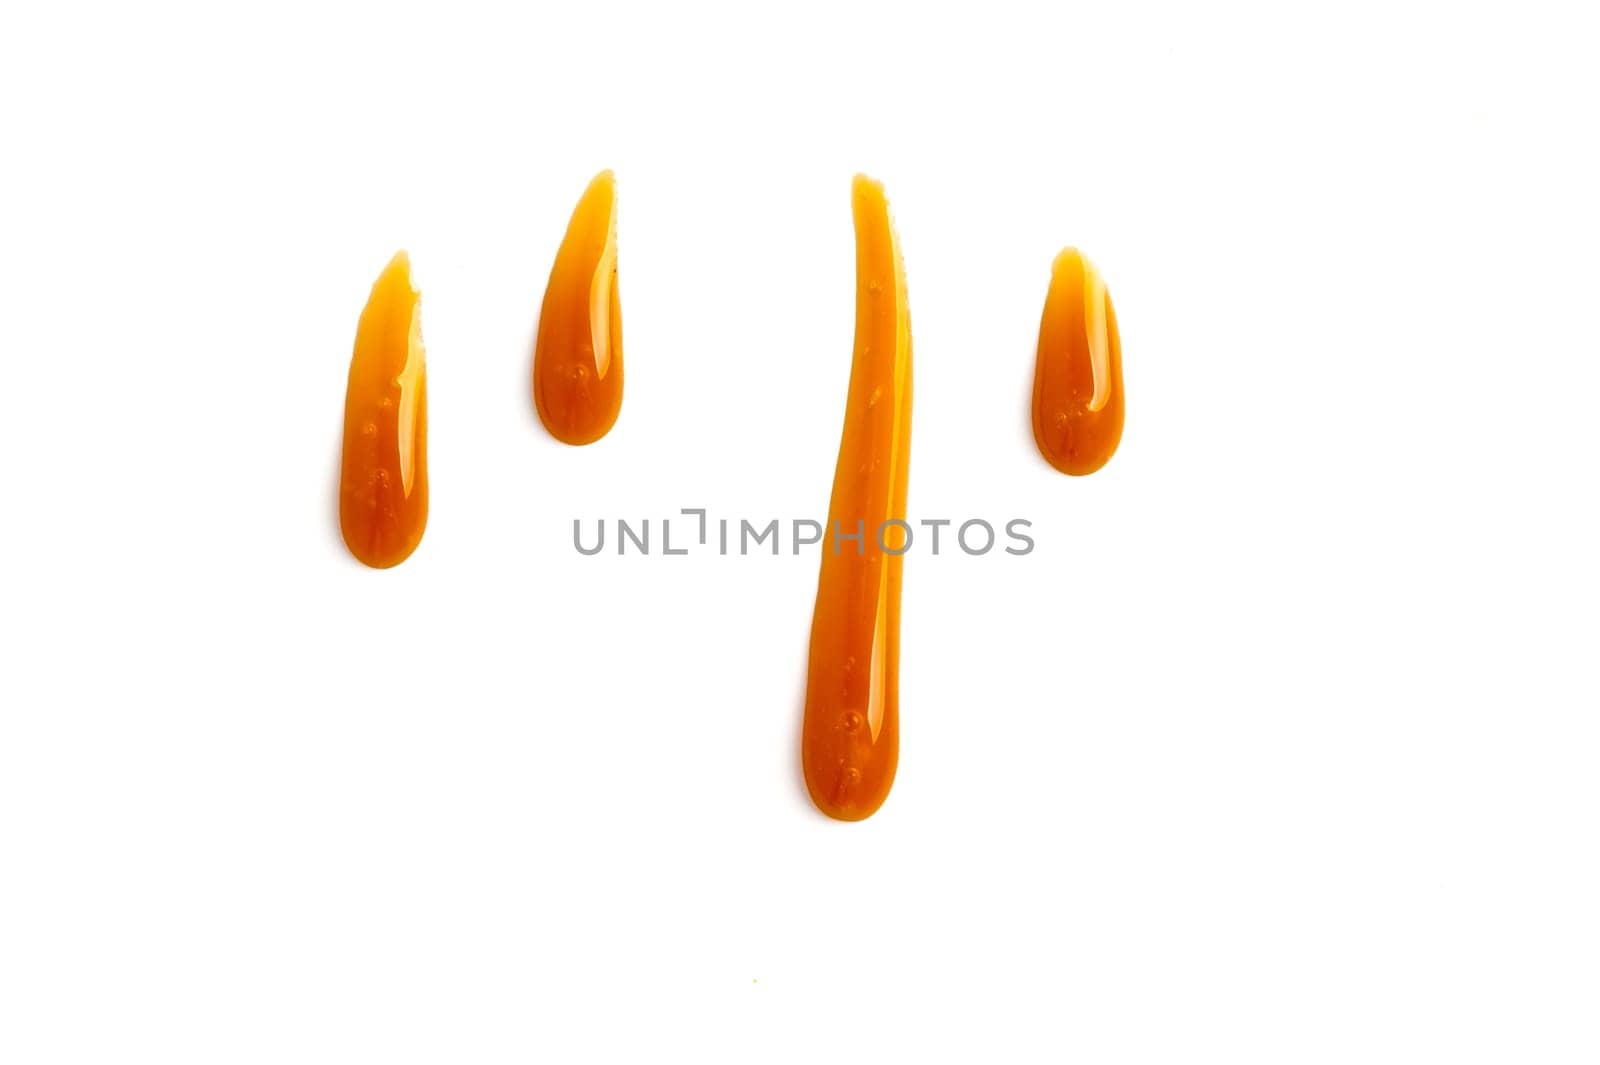 sweet caramel sauce drops isolated on white by fascinadora